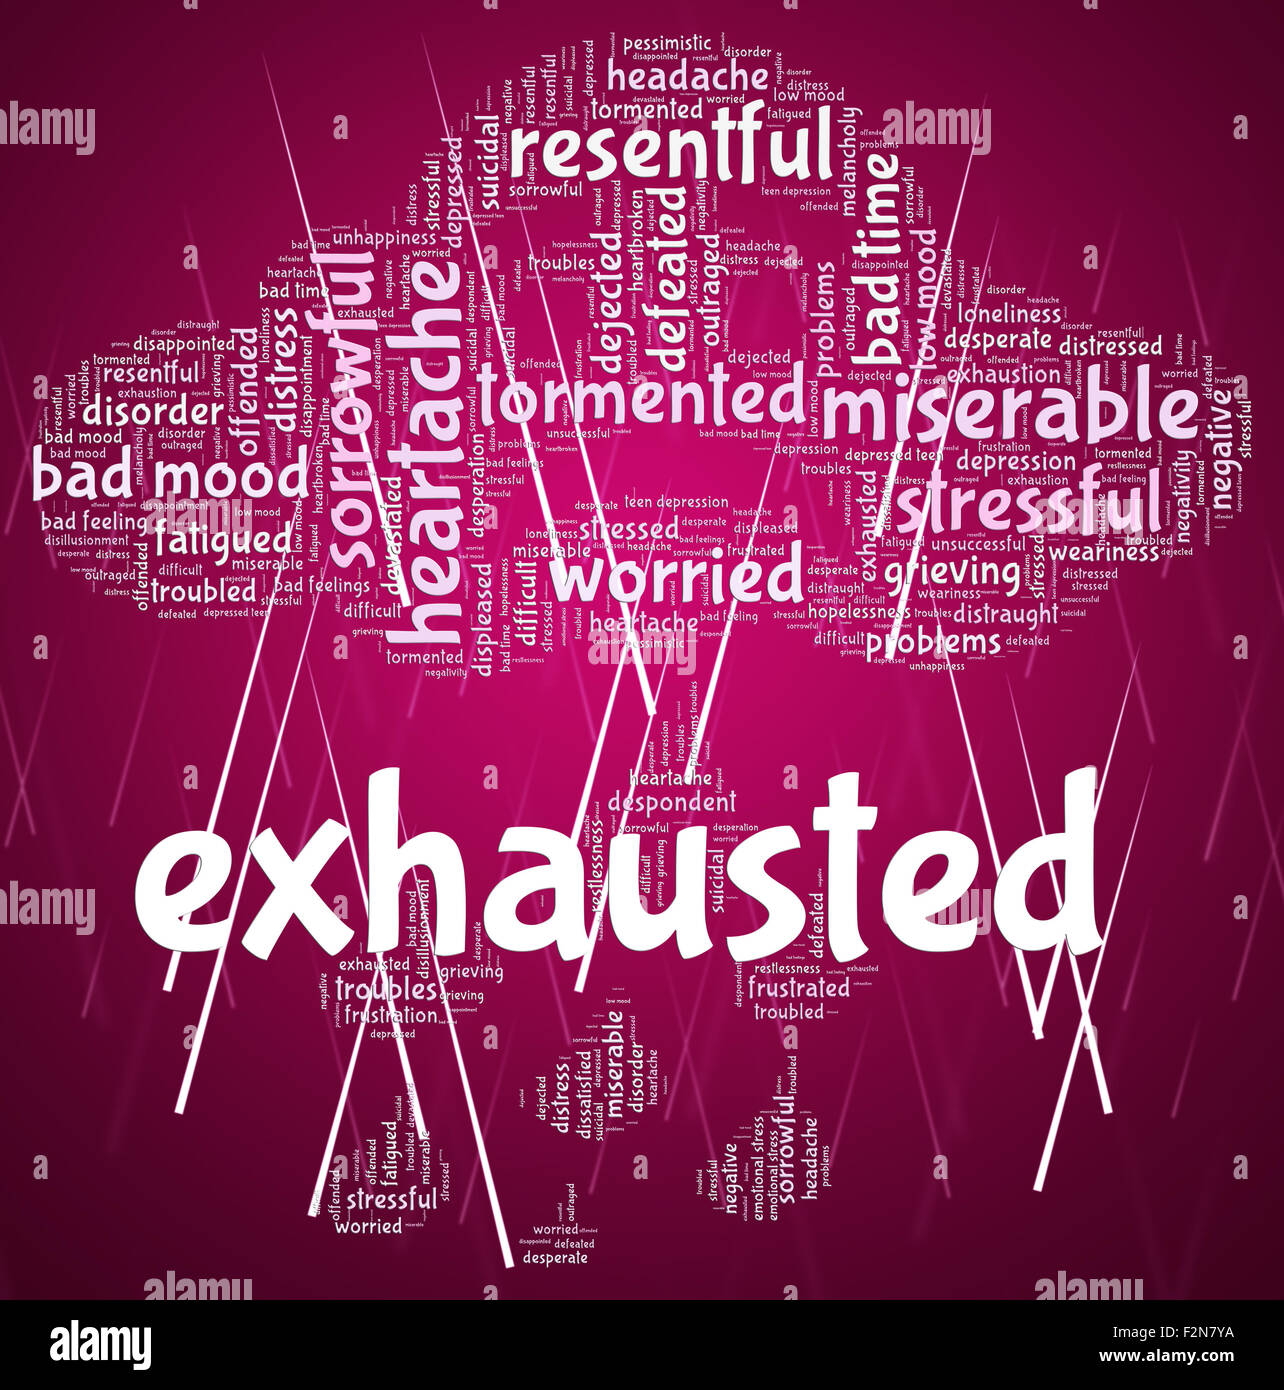 Exhausted Word Meaning Worn Out And Shattered Stock Photo - Alamy